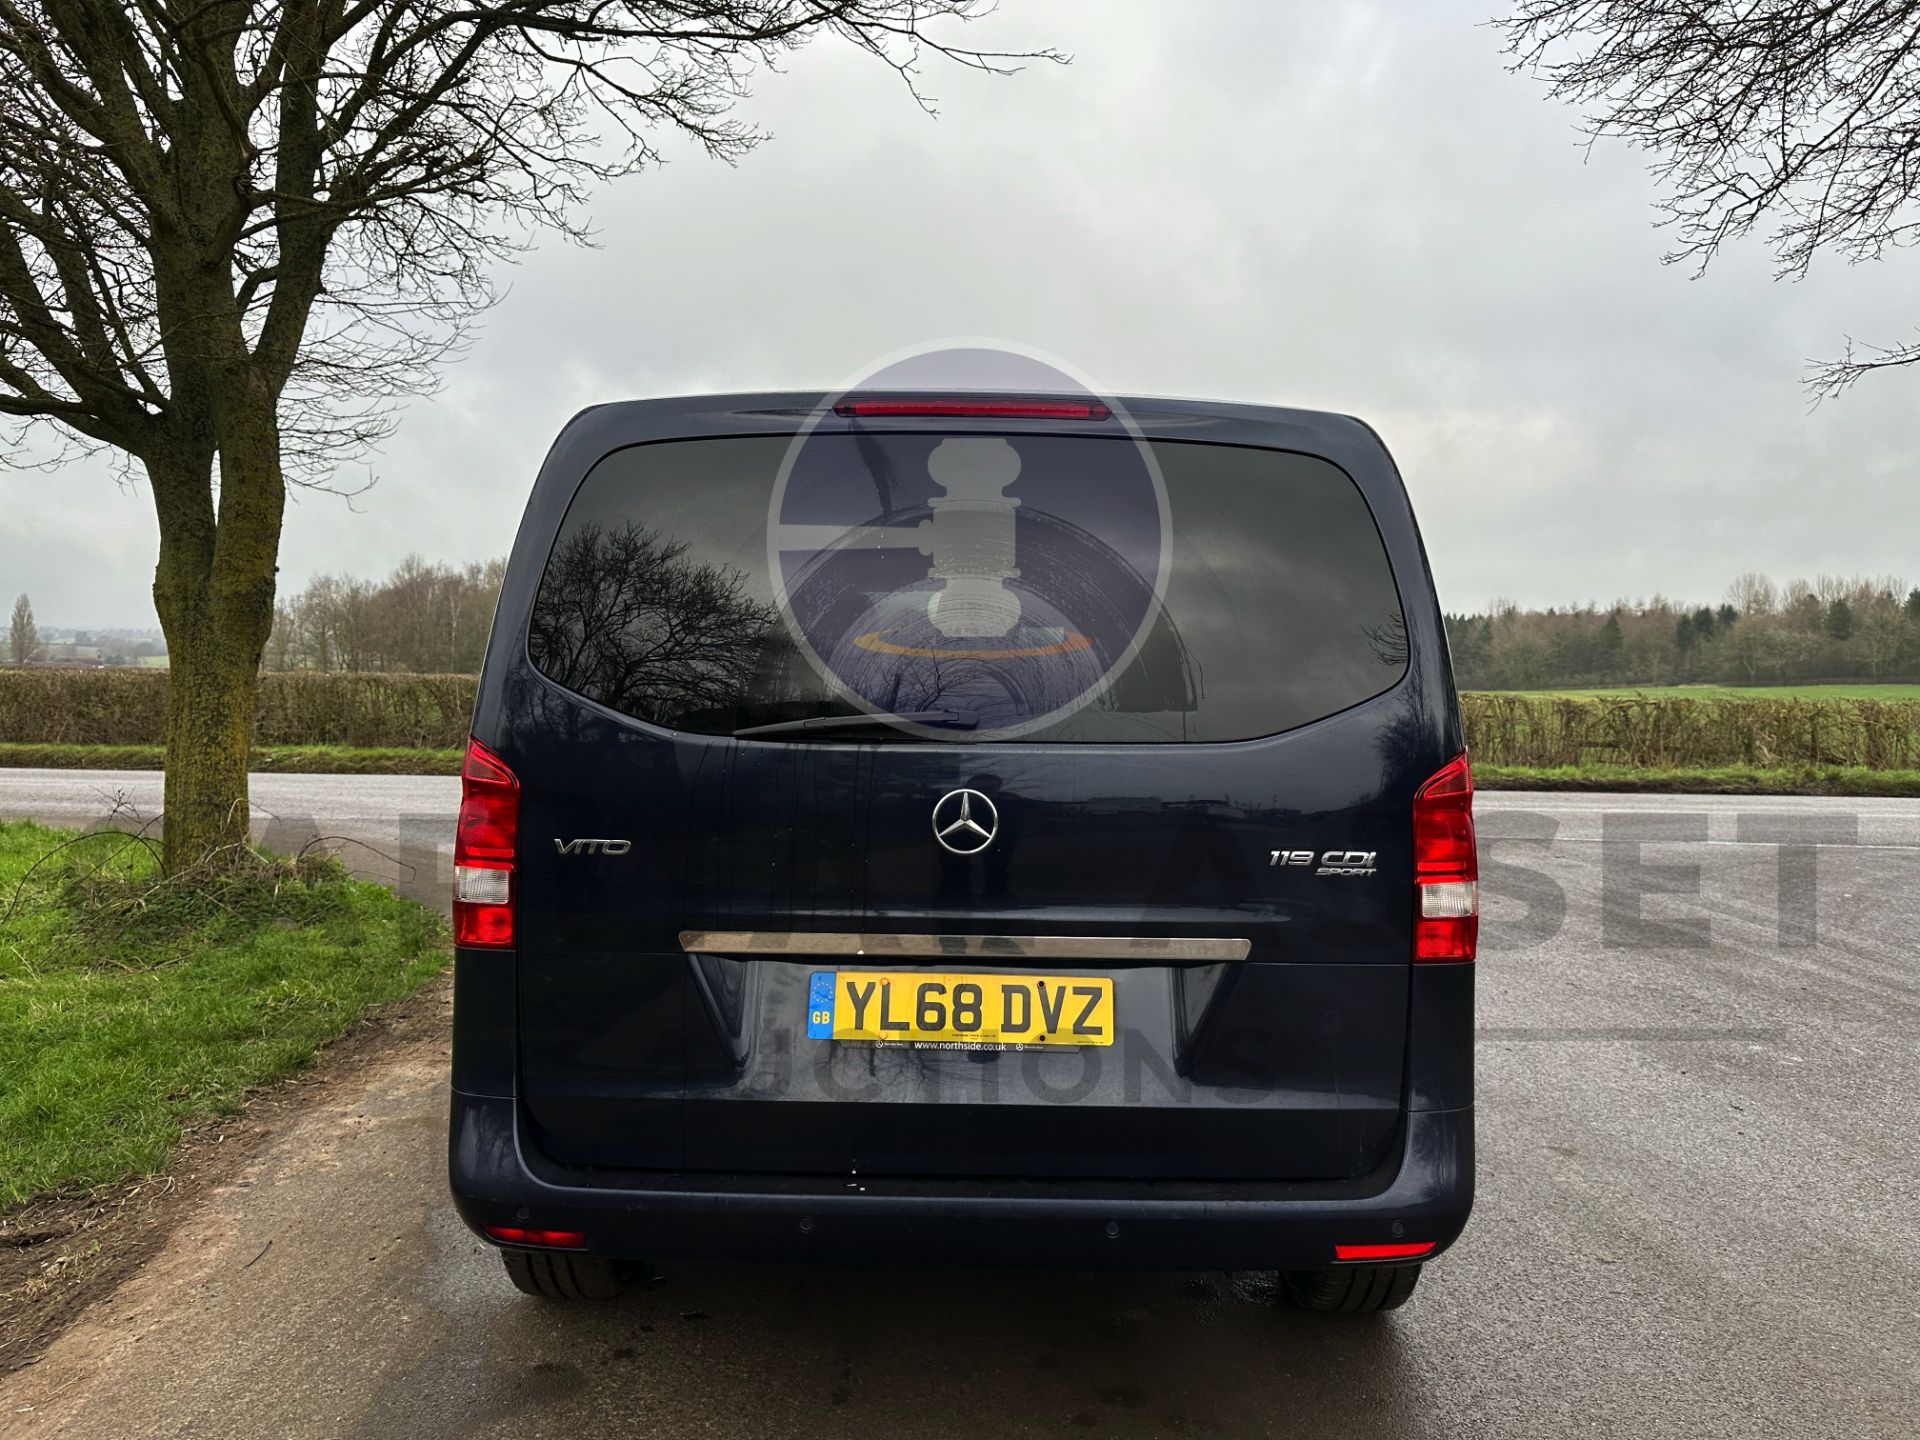 (ON SALE) MERCEDES-BENZ VITO 119 CDI AUTO *SWB - 5 SEATER DUALINER* (2019 - EURO 6) *SPORT EDITION* - Image 11 of 44